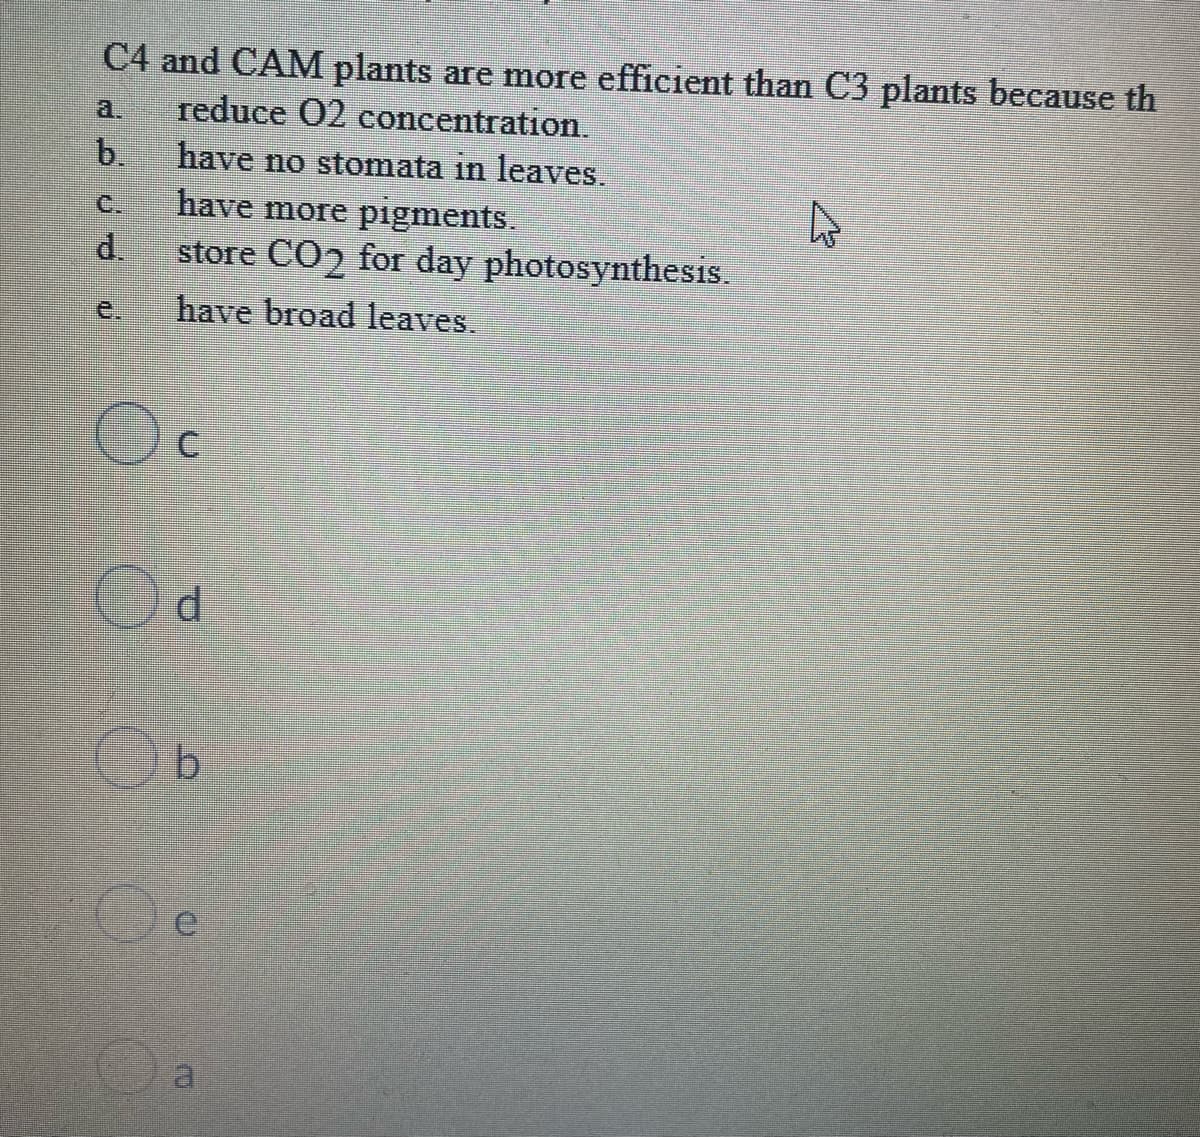 C4 and CAM plants are more efficient than C3 plants because th
reduce O2 concentration.
b.
have no stomata in leaves.
have more pigments.
store CO2 for day photosynthesis.
have broad leaves.
C
d
b
ERW
a